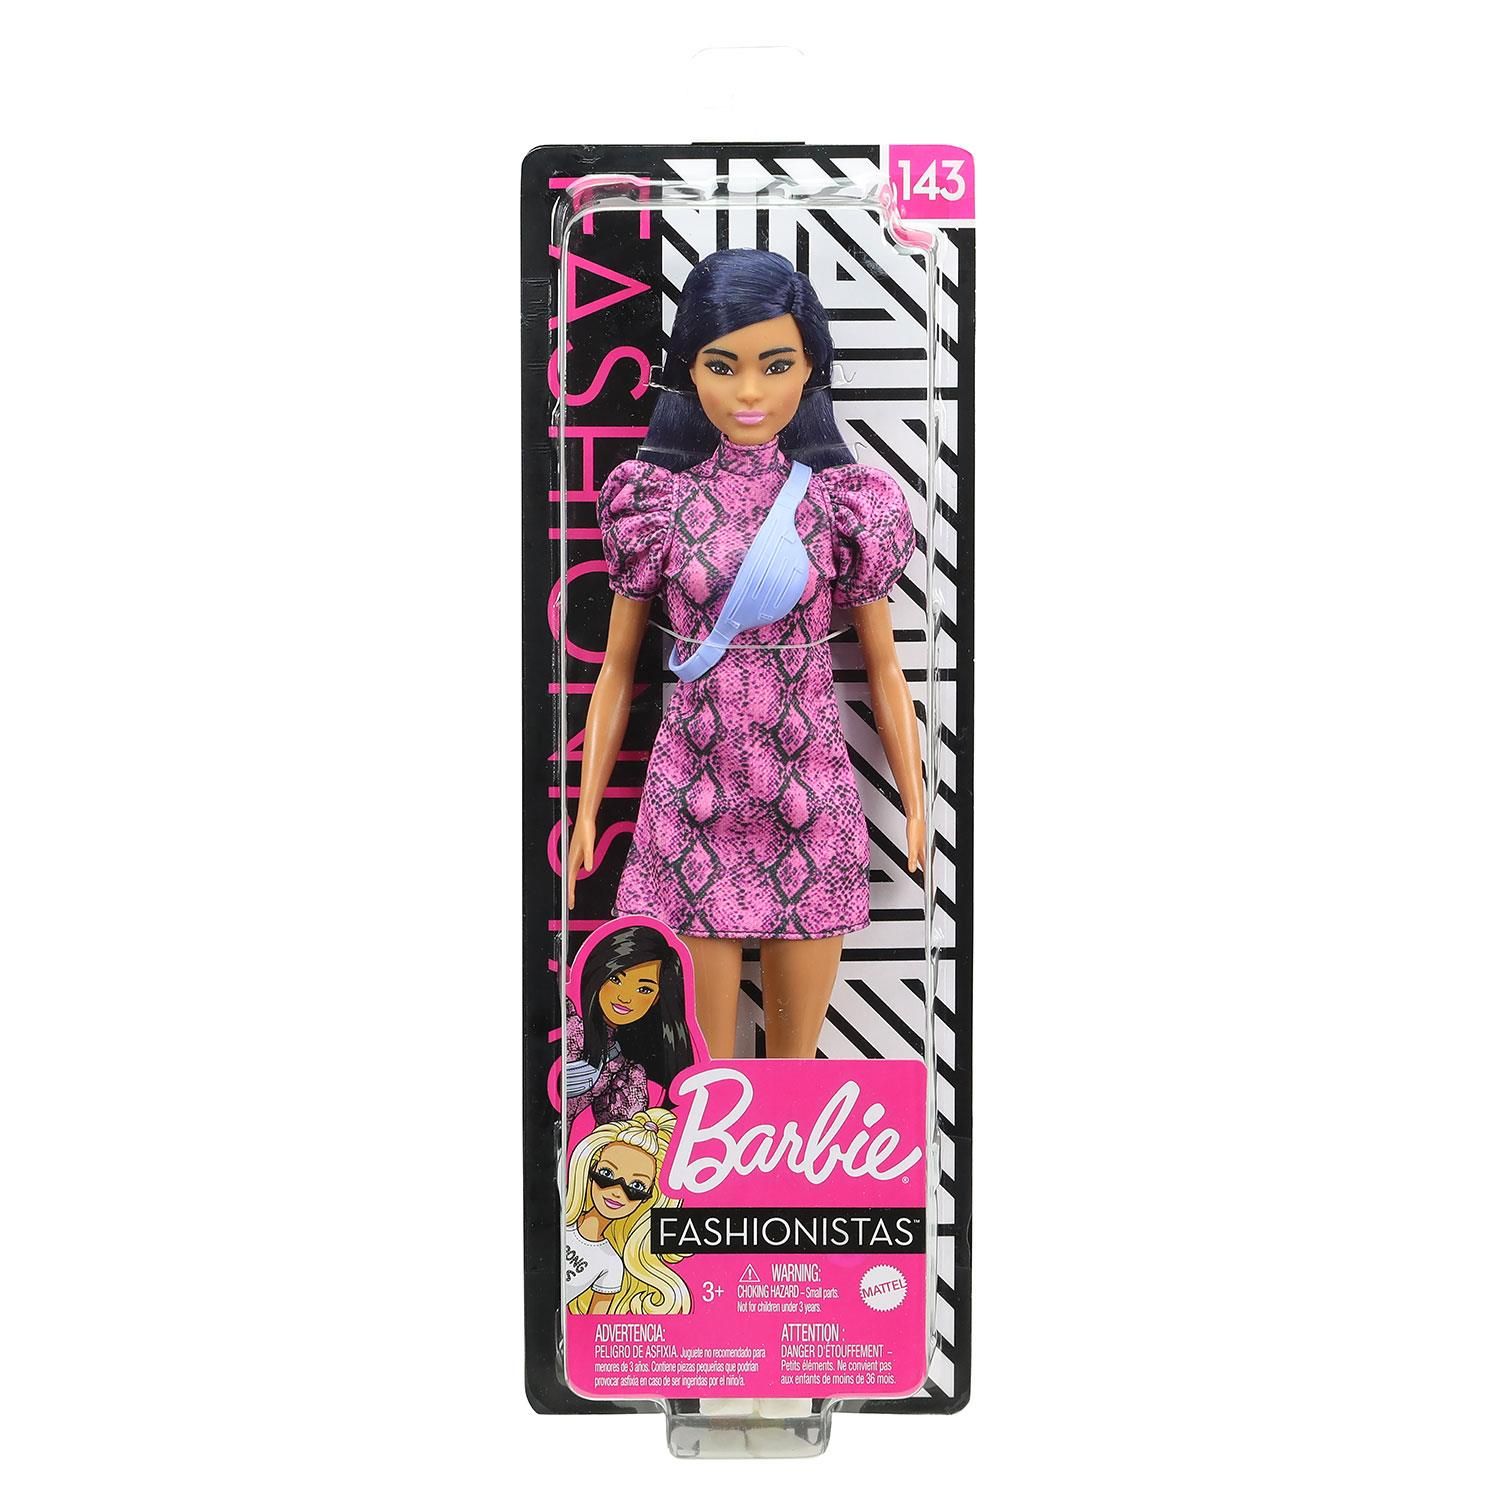 Barbie Fashionista Doll Snakeskin Dress, Great Toy For 3 Years Old & Up

Barbie Fashionista dolls celebrate diversity their unique looks and fashions encourage real-world storytelling and open-ended dreams. With a wide variety of skin tones, eye colours, hair colours, textures, body types, and fashions, the dolls are designed to reflect the world kids see today. Kids can collect them for infinite ways to play out stories, express their own style, and discover Barbie! Includes Barbie Fashionistas doll wearing fashions and accessories. Each is sold separately, subject to availability. Barbie dolls cannot stand alone. Flat shoes fit dolls with articulated ankles or flat feet. colours and decorations may vary.

Features:

White sneakers and a blue cross-body bag complete the outfit.
​Her long blue hair is styled straight for a trendy look.
​The latest line of Barbie Fashionistas dolls includes 5 body types, 10 skin tones, 8 eye colours, 19 hair colours, 19 hairstyles and so many fashions inspired by the latest trends!
​The Barbie doll wears a pink and black snakeskin-print dress with puffy sleeves.
​Makes a great gift for kids 3 years and older they can play with style, play out stories, and discover Barbie.

Specifications:

Toy Type: Doll
Material: Abs Plastic
Colour: Pink
Age Range: 3 Years & up

Package Includes: Barbie Fashionista Doll Wearing Snakeskin Dress, Pink